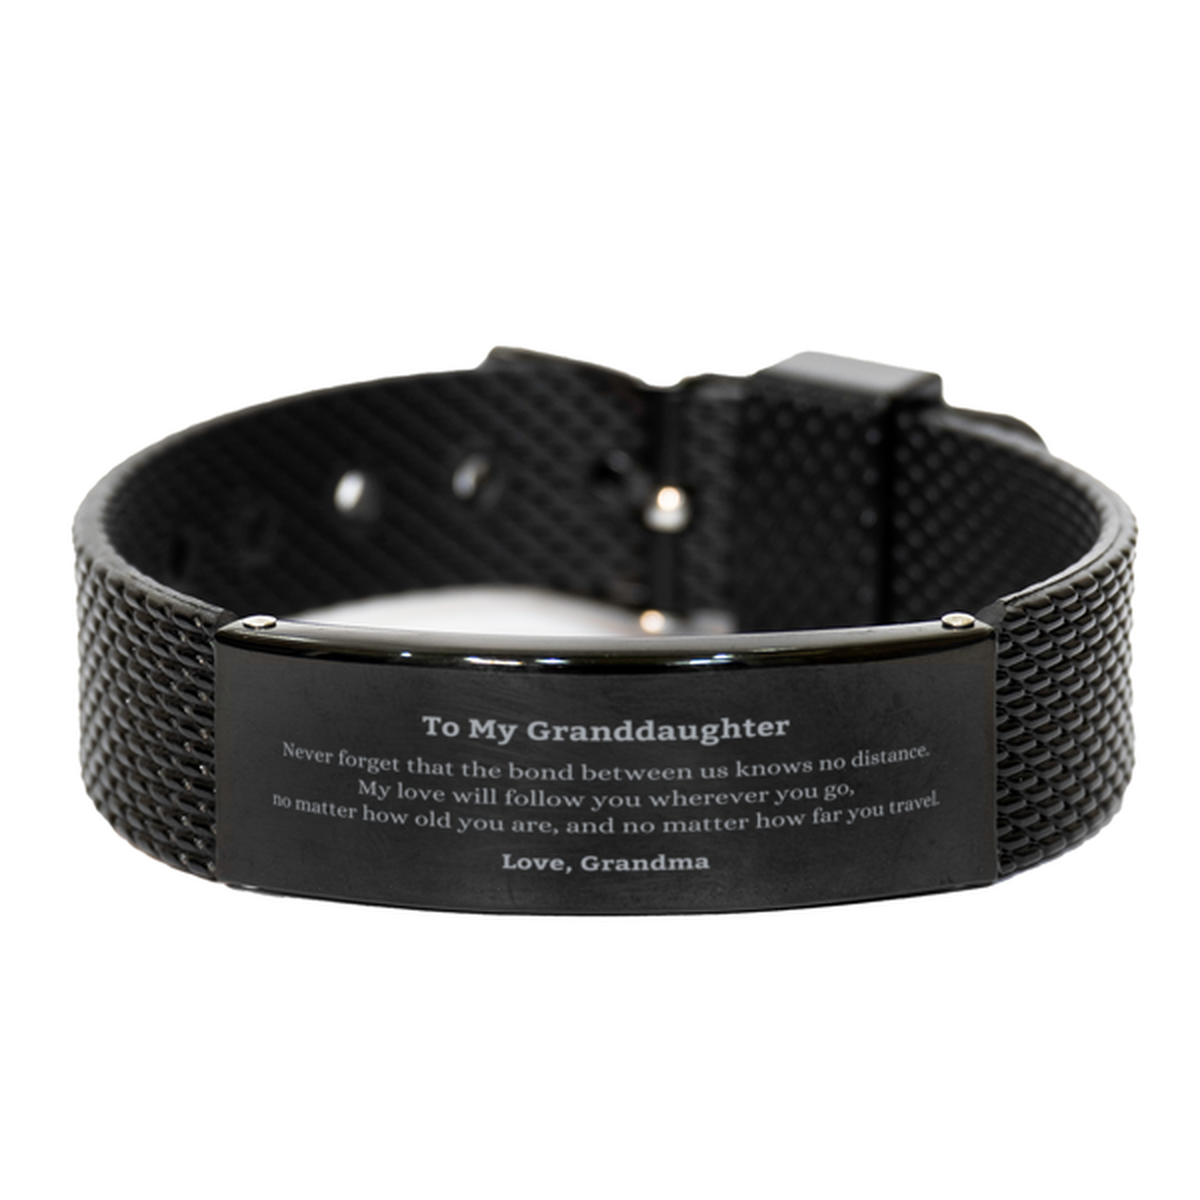 Granddaughter Birthday Gifts from Grandma, Adjustable Black Shark Mesh Bracelet for Granddaughter Christmas Graduation Unique Gifts Granddaughter Never forget that the bond between us knows no distance. Love, Grandma